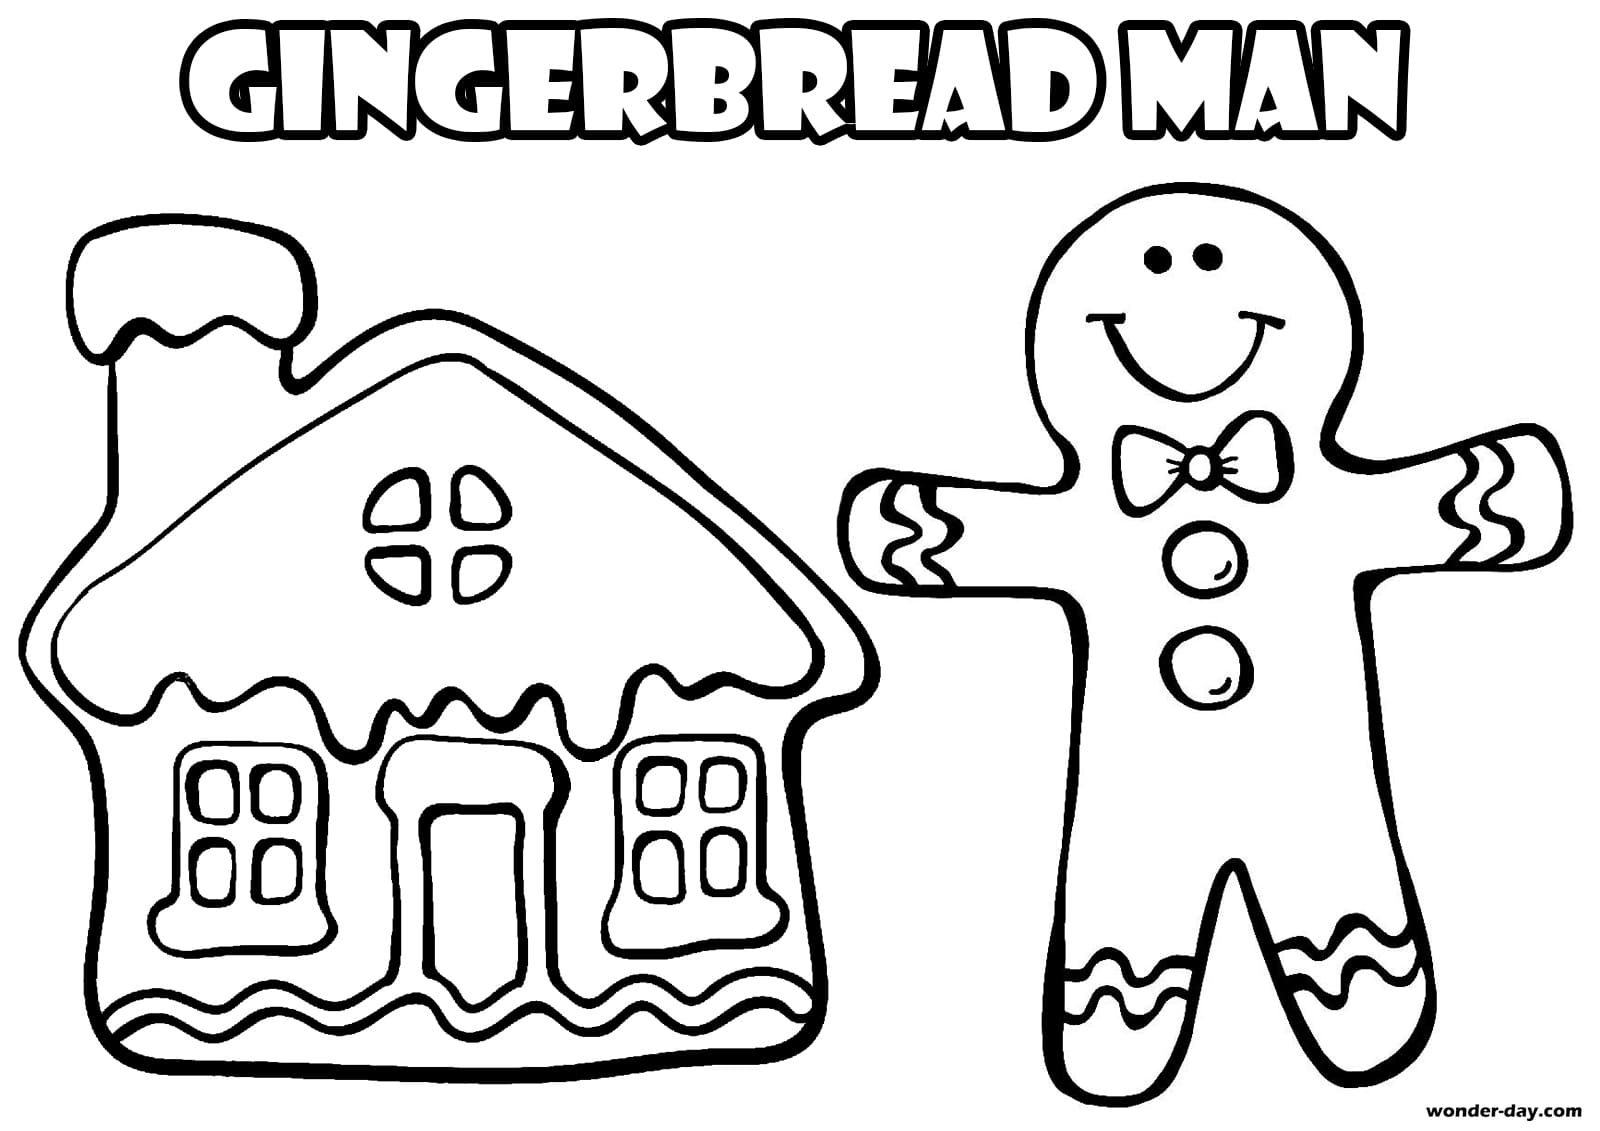 Gingerbread Man coloring pages. Free Printable Coloring Pages